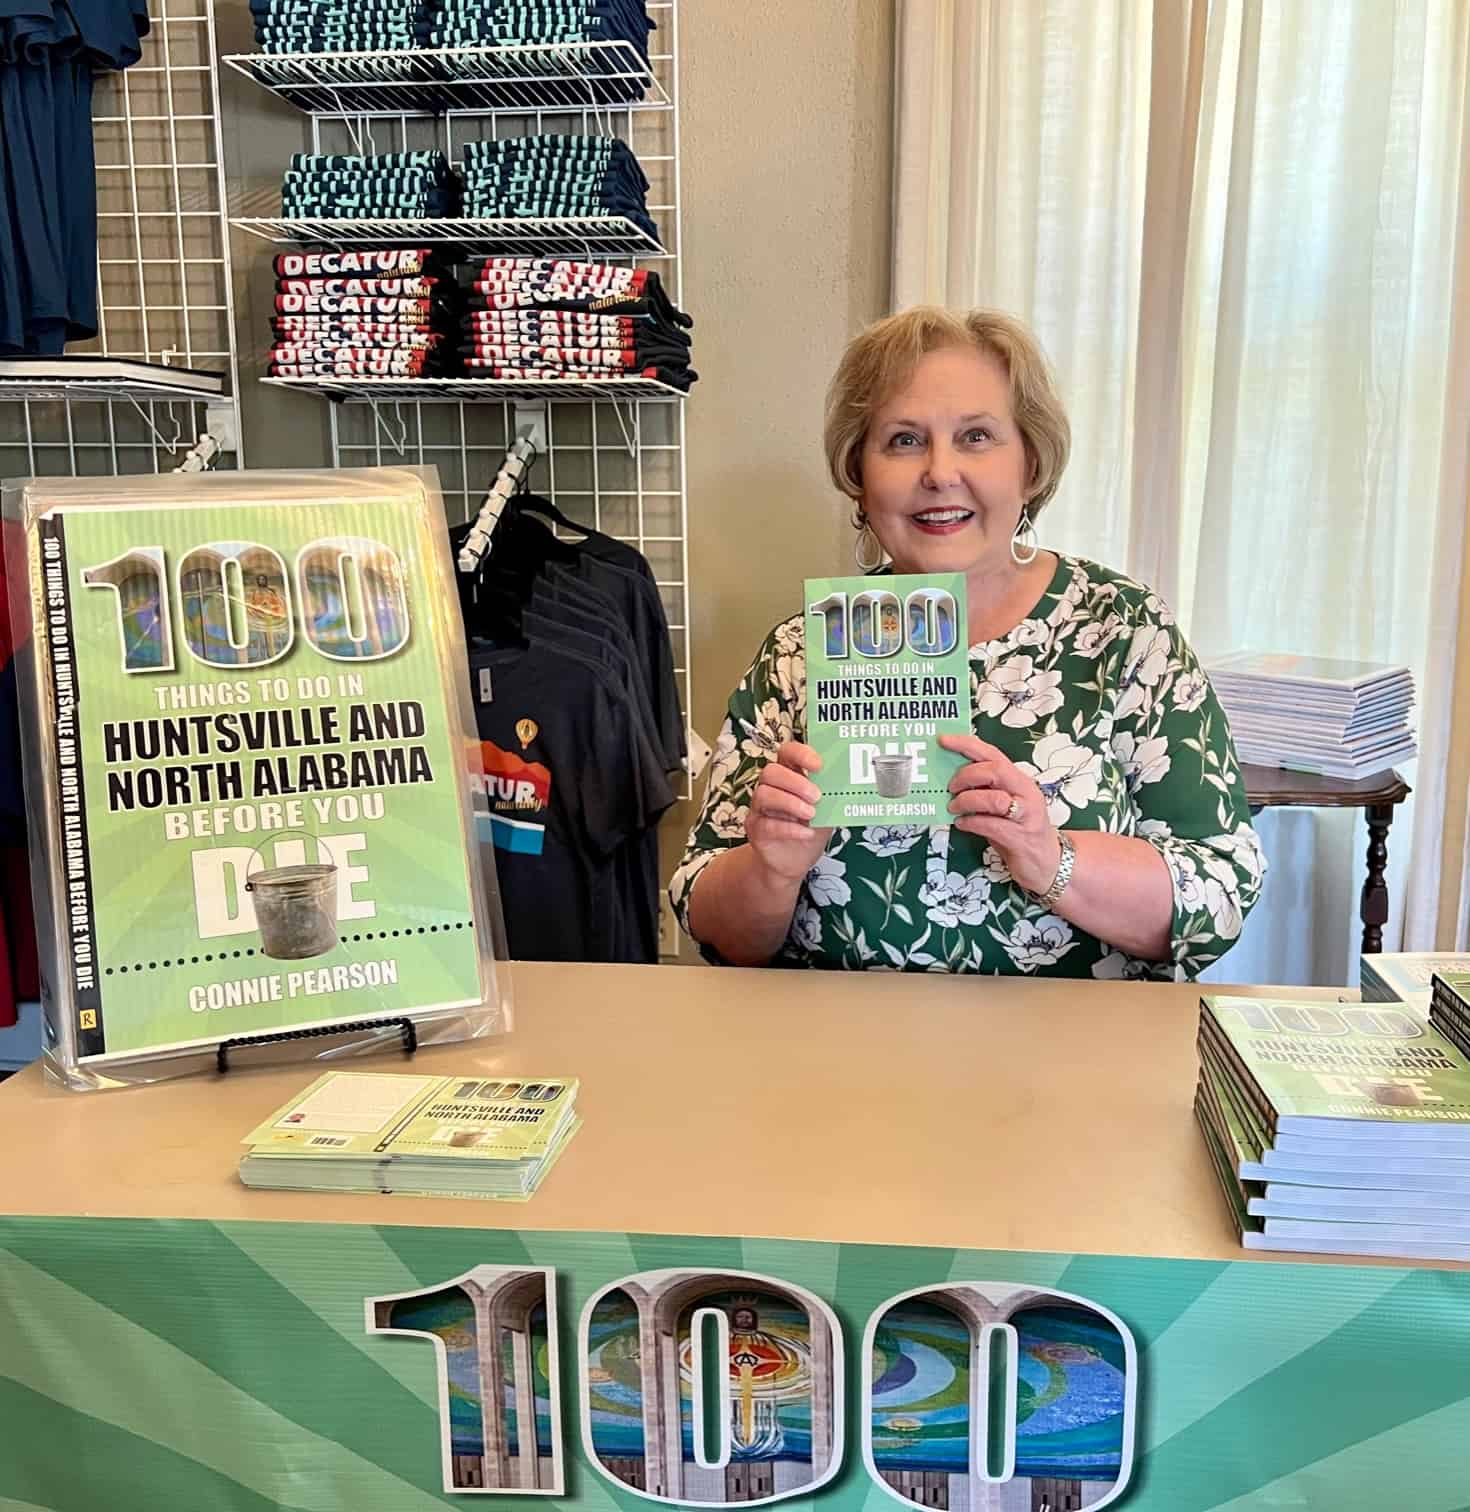 WeTravelThere - Connie Pearson at a book signing in Decatur, AL